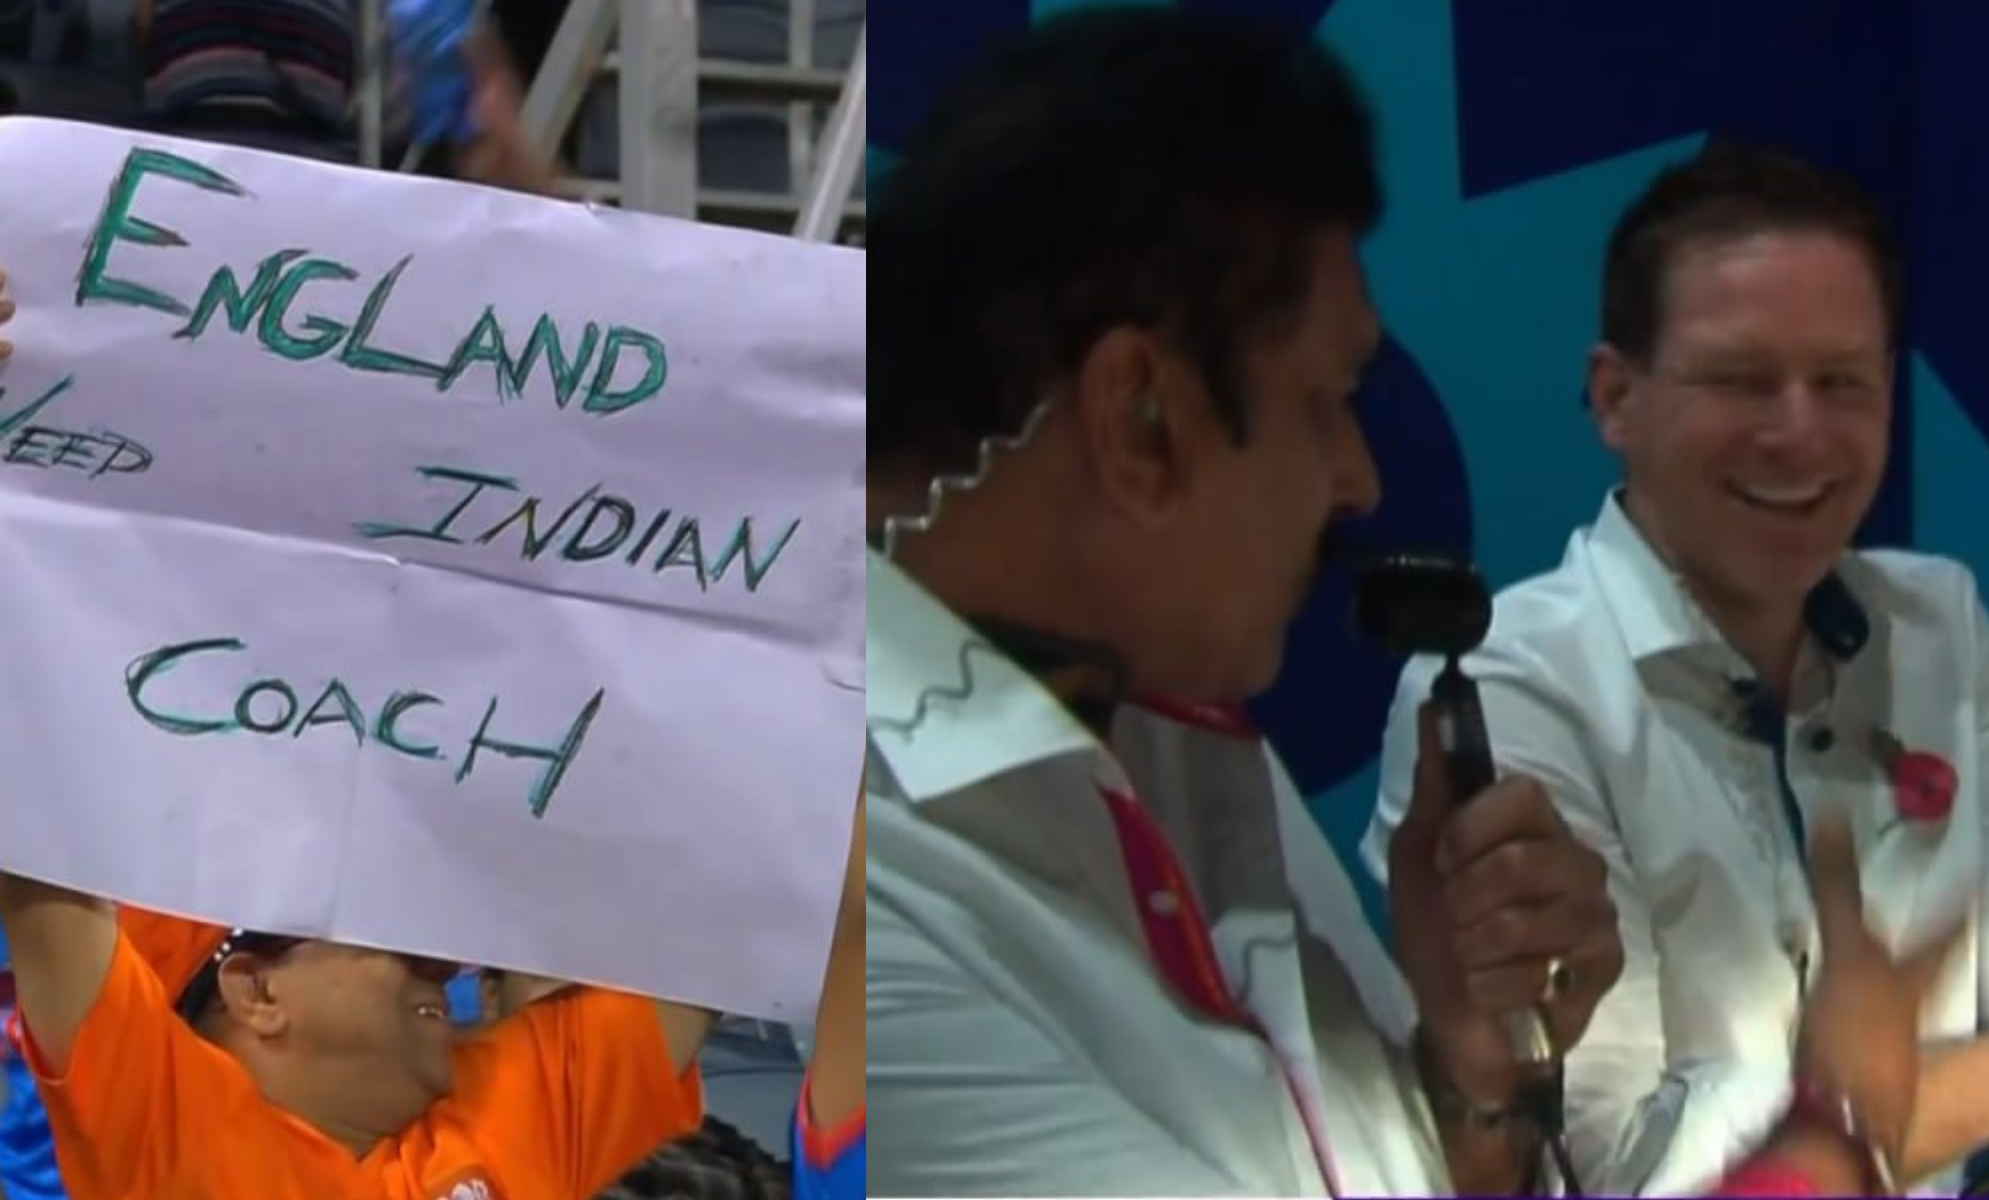 A fan poster leads to funny banter between Morgan and Shastri | X